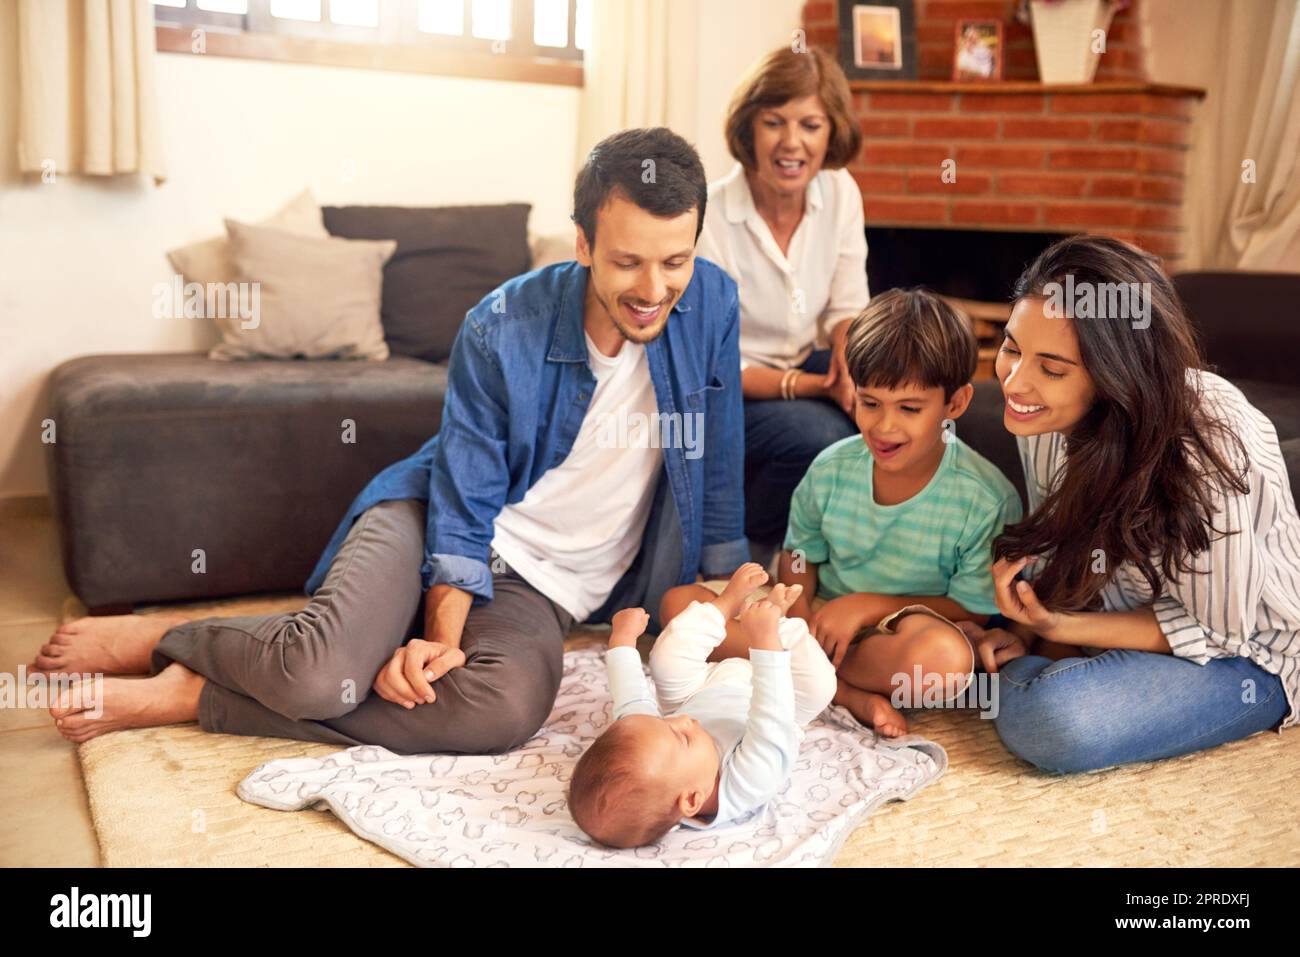 Theyre all fussing over the new baby. Full length shot of an affectionate young family spending quality time together at home. Stock Photo